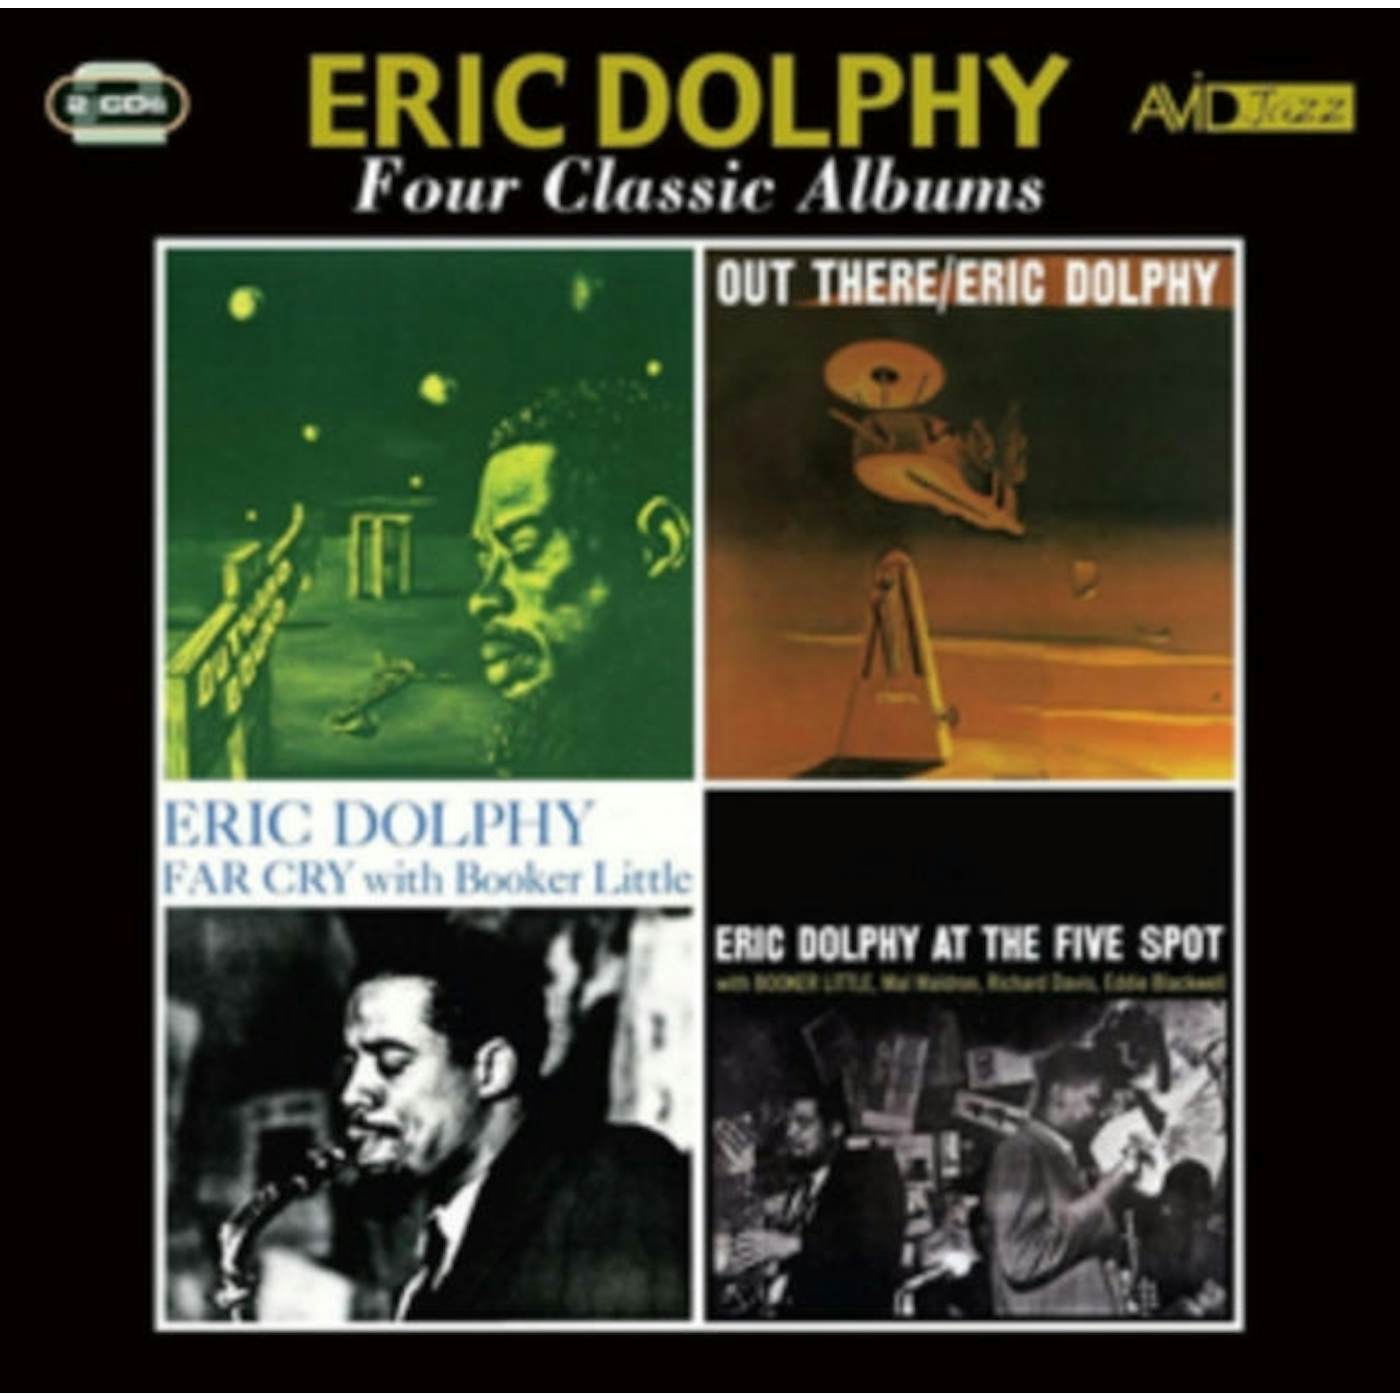 Eric Dolphy CD - Four Classic Albums